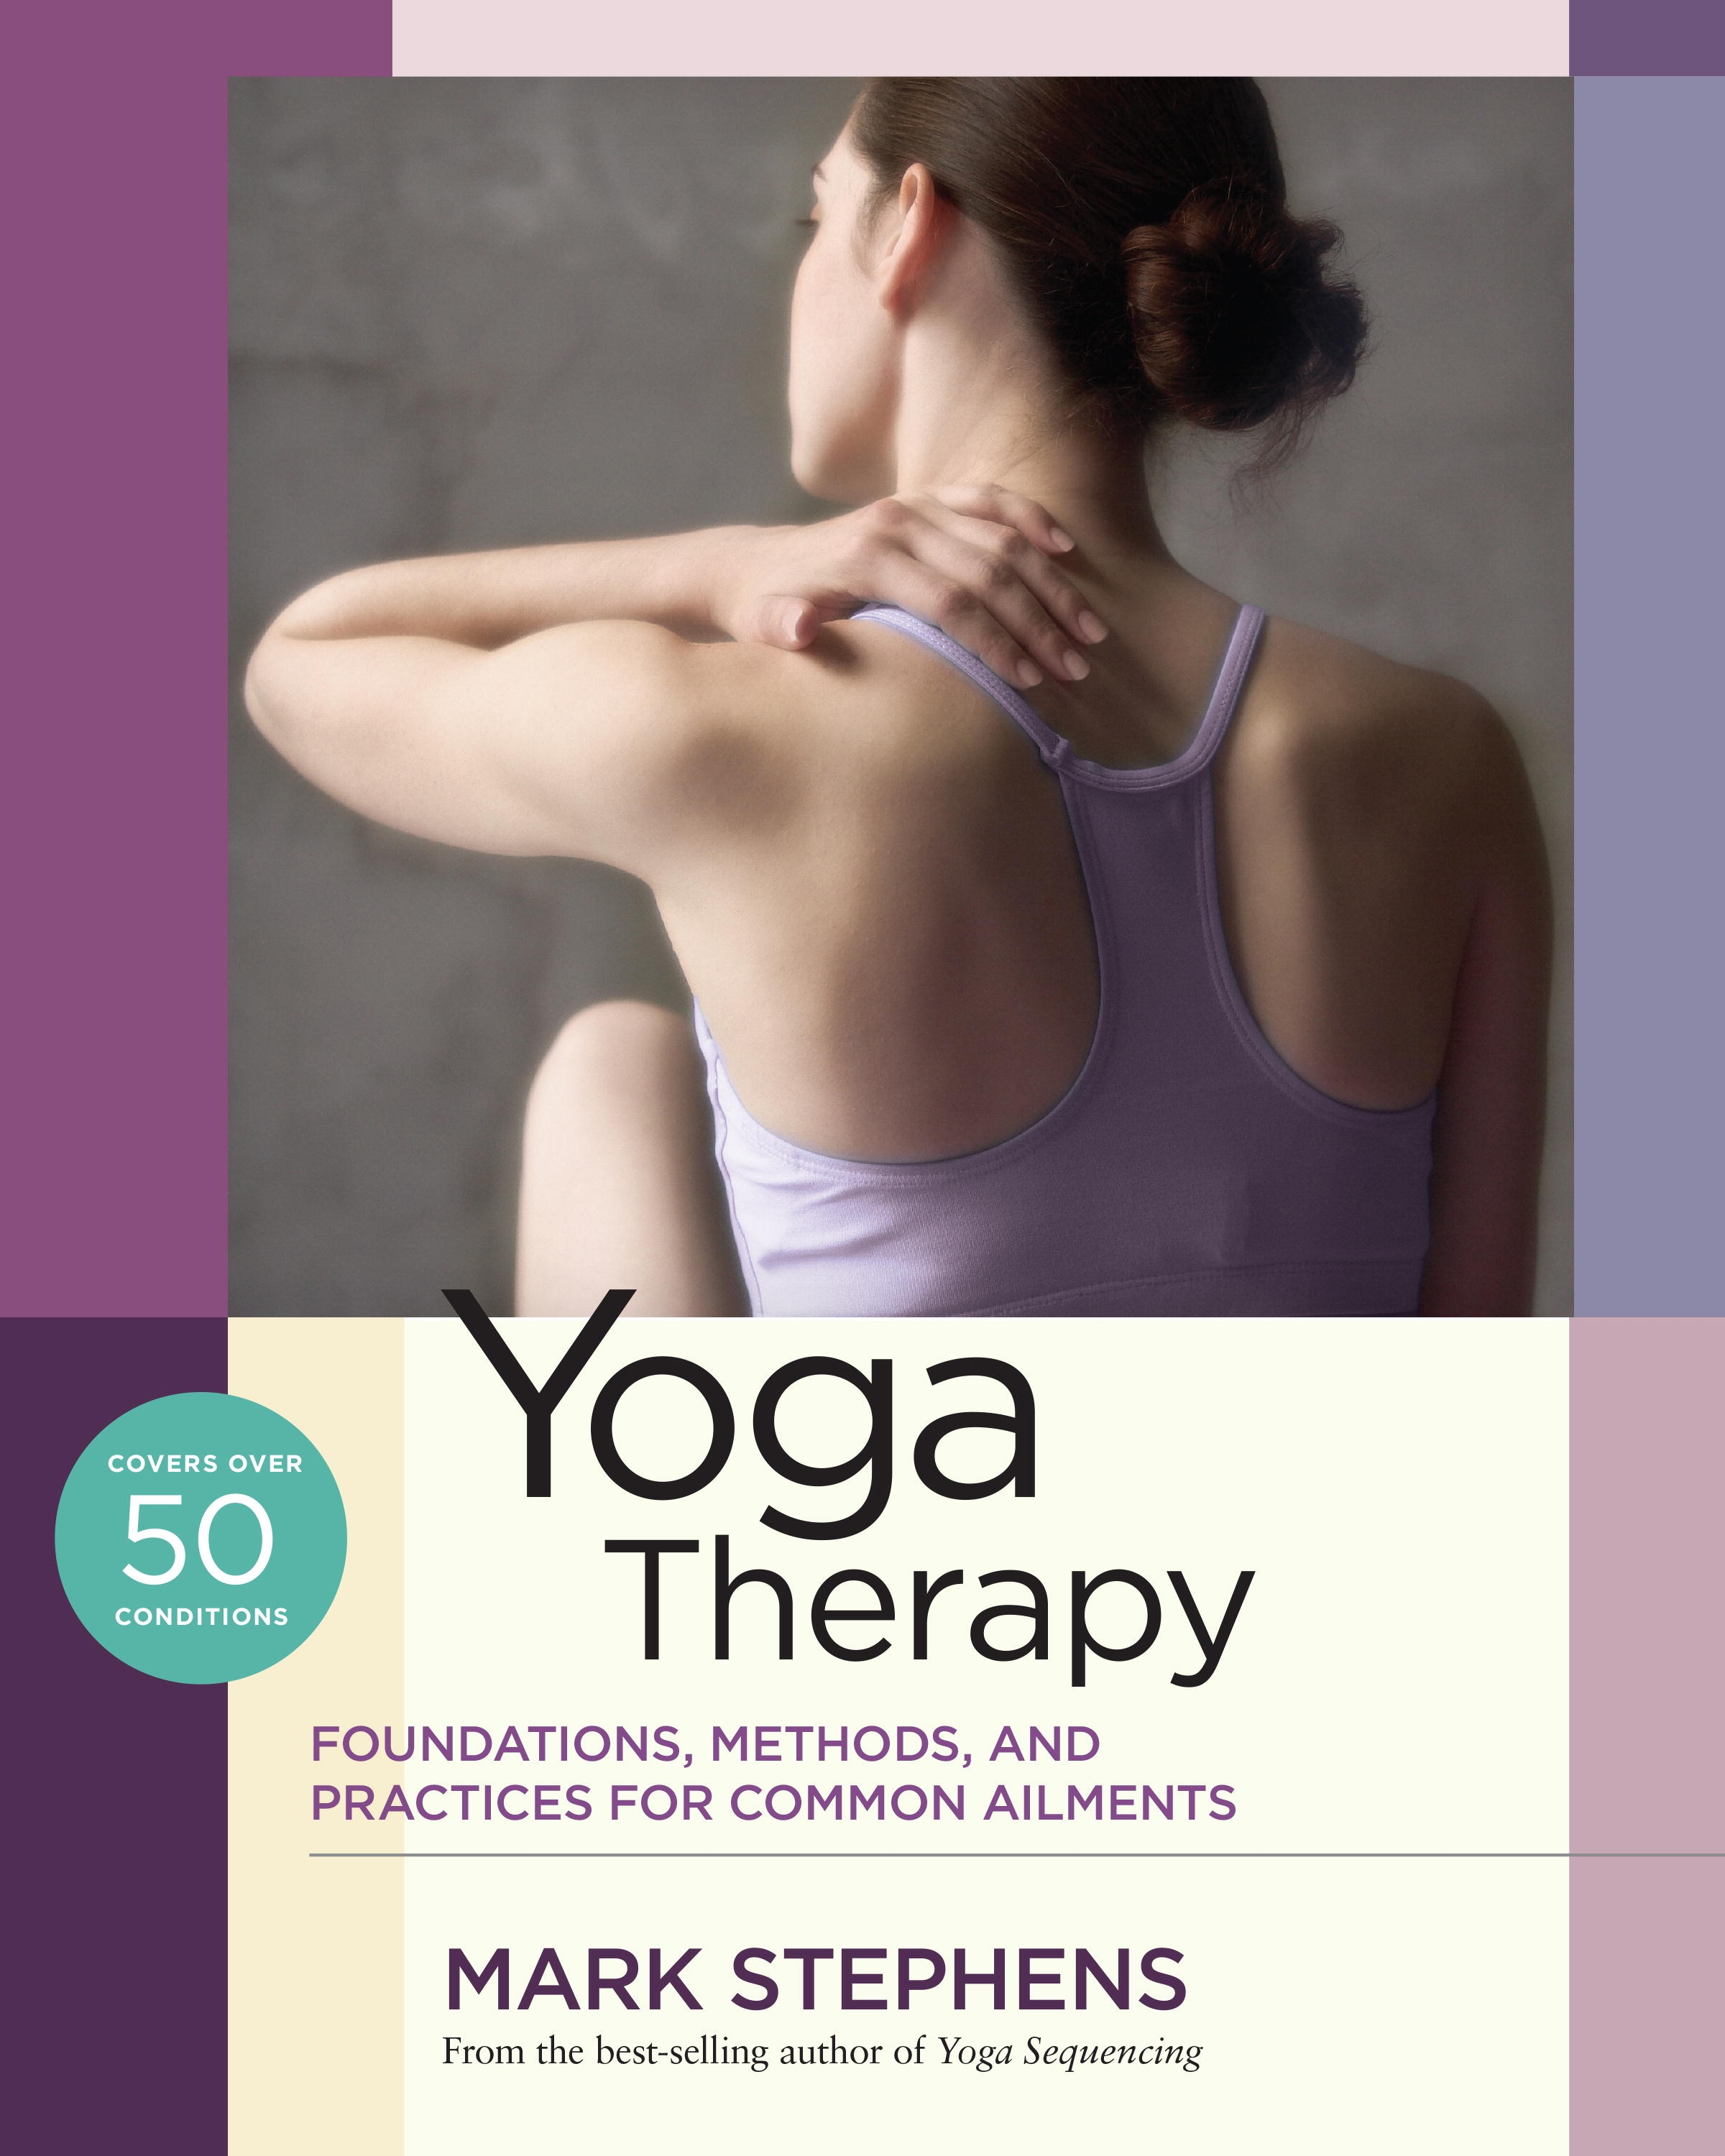 Yoga Therapy by Mark Stephens - Penguin Books New Zealand